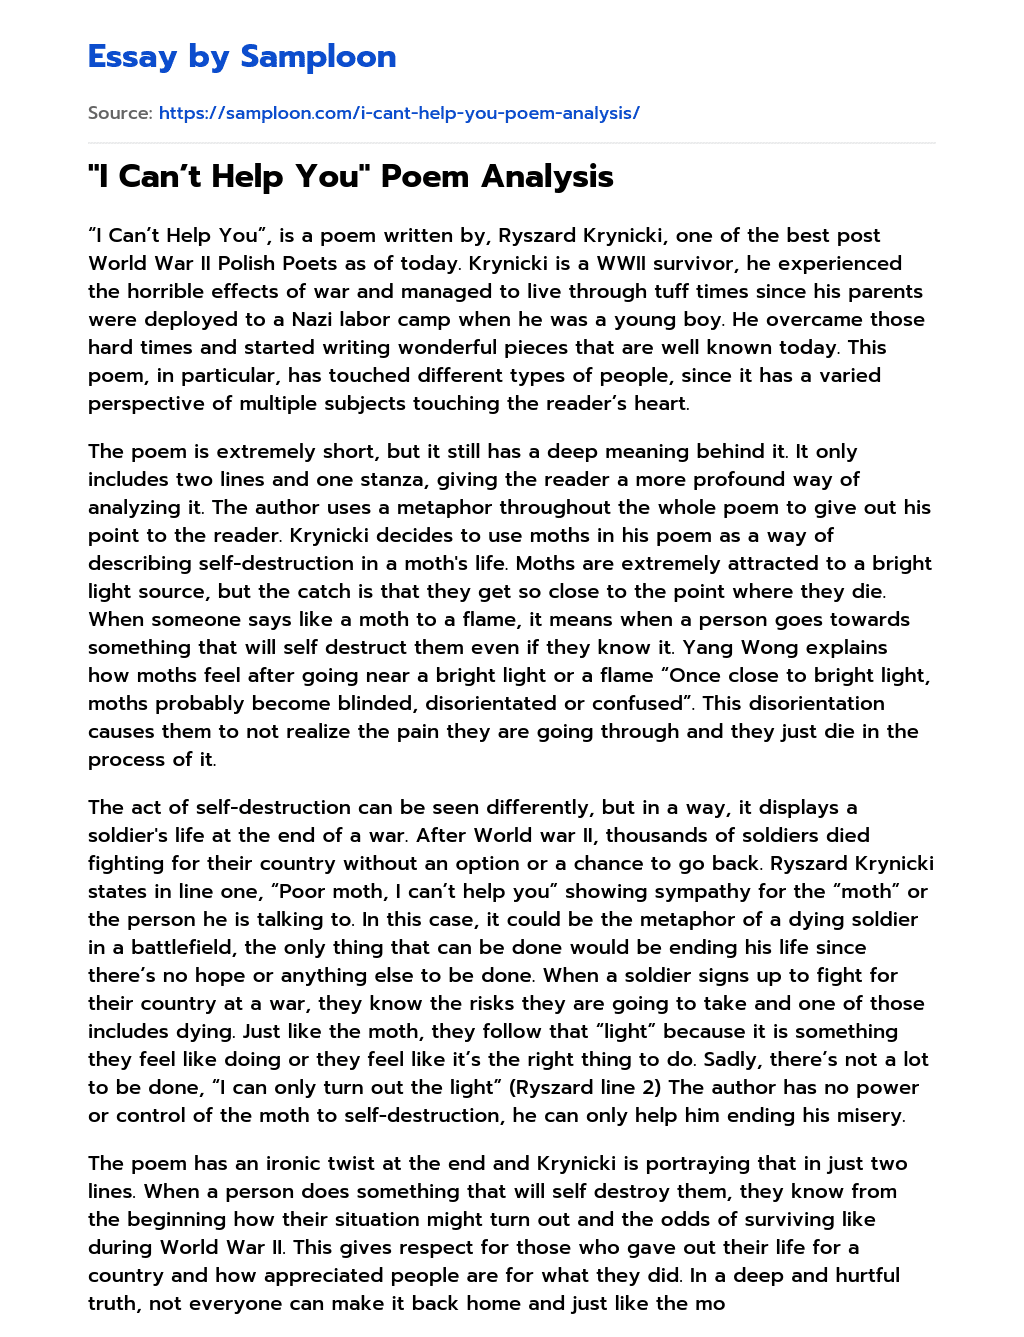 “I Can’t Help You” Poem Analysis  essay